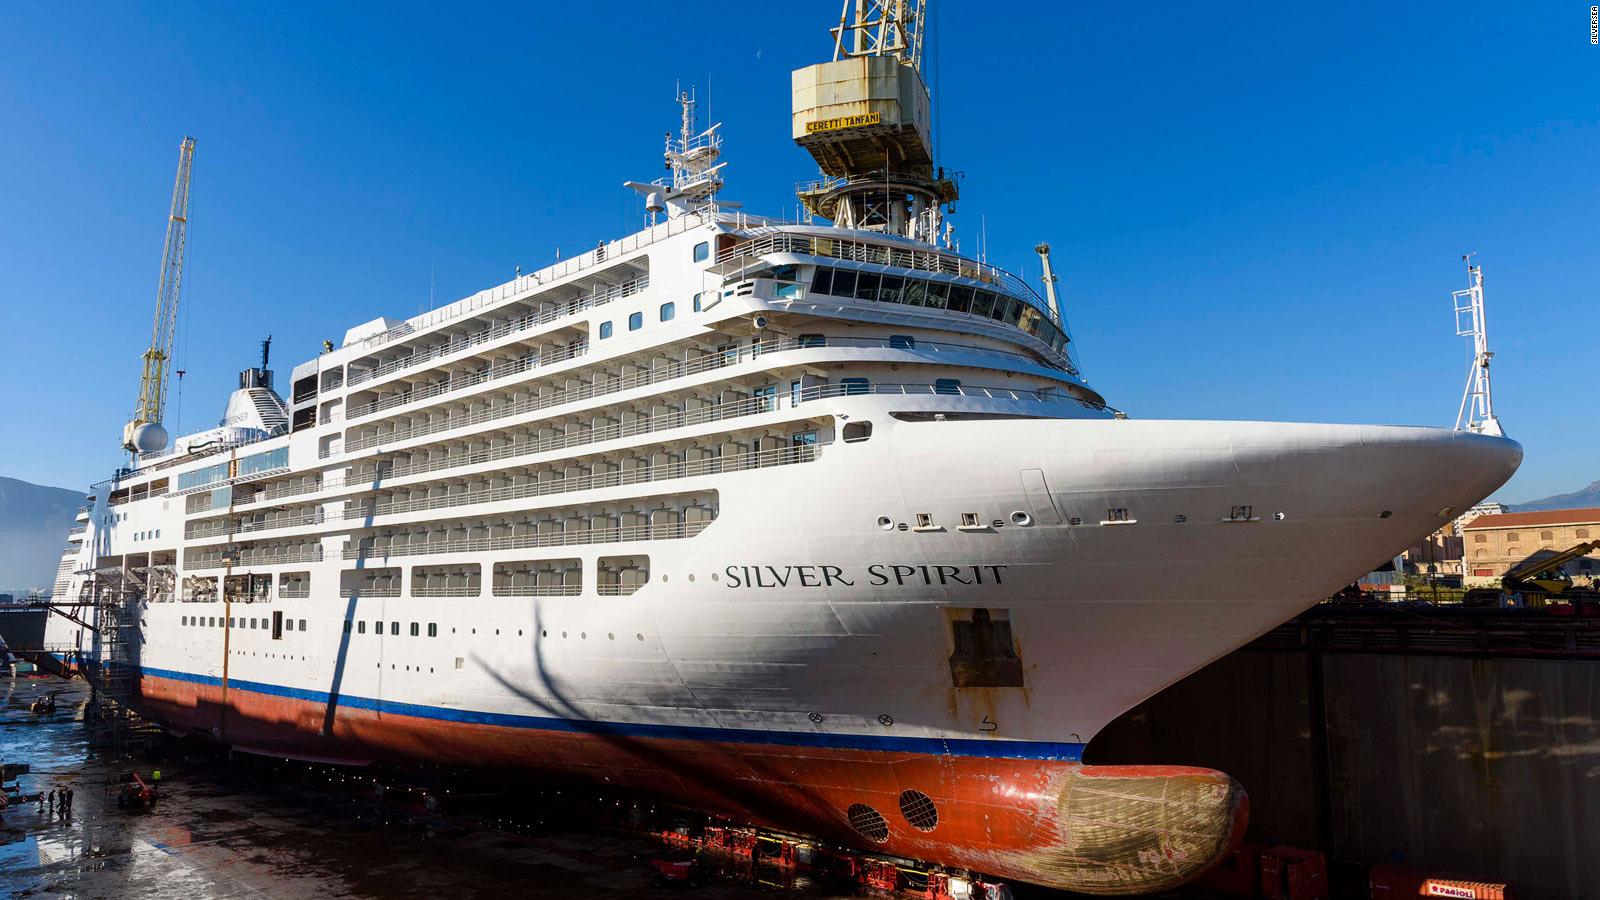 The 10 Best New Cruise Ships For 2019 Cnn Travel Images, Photos, Reviews